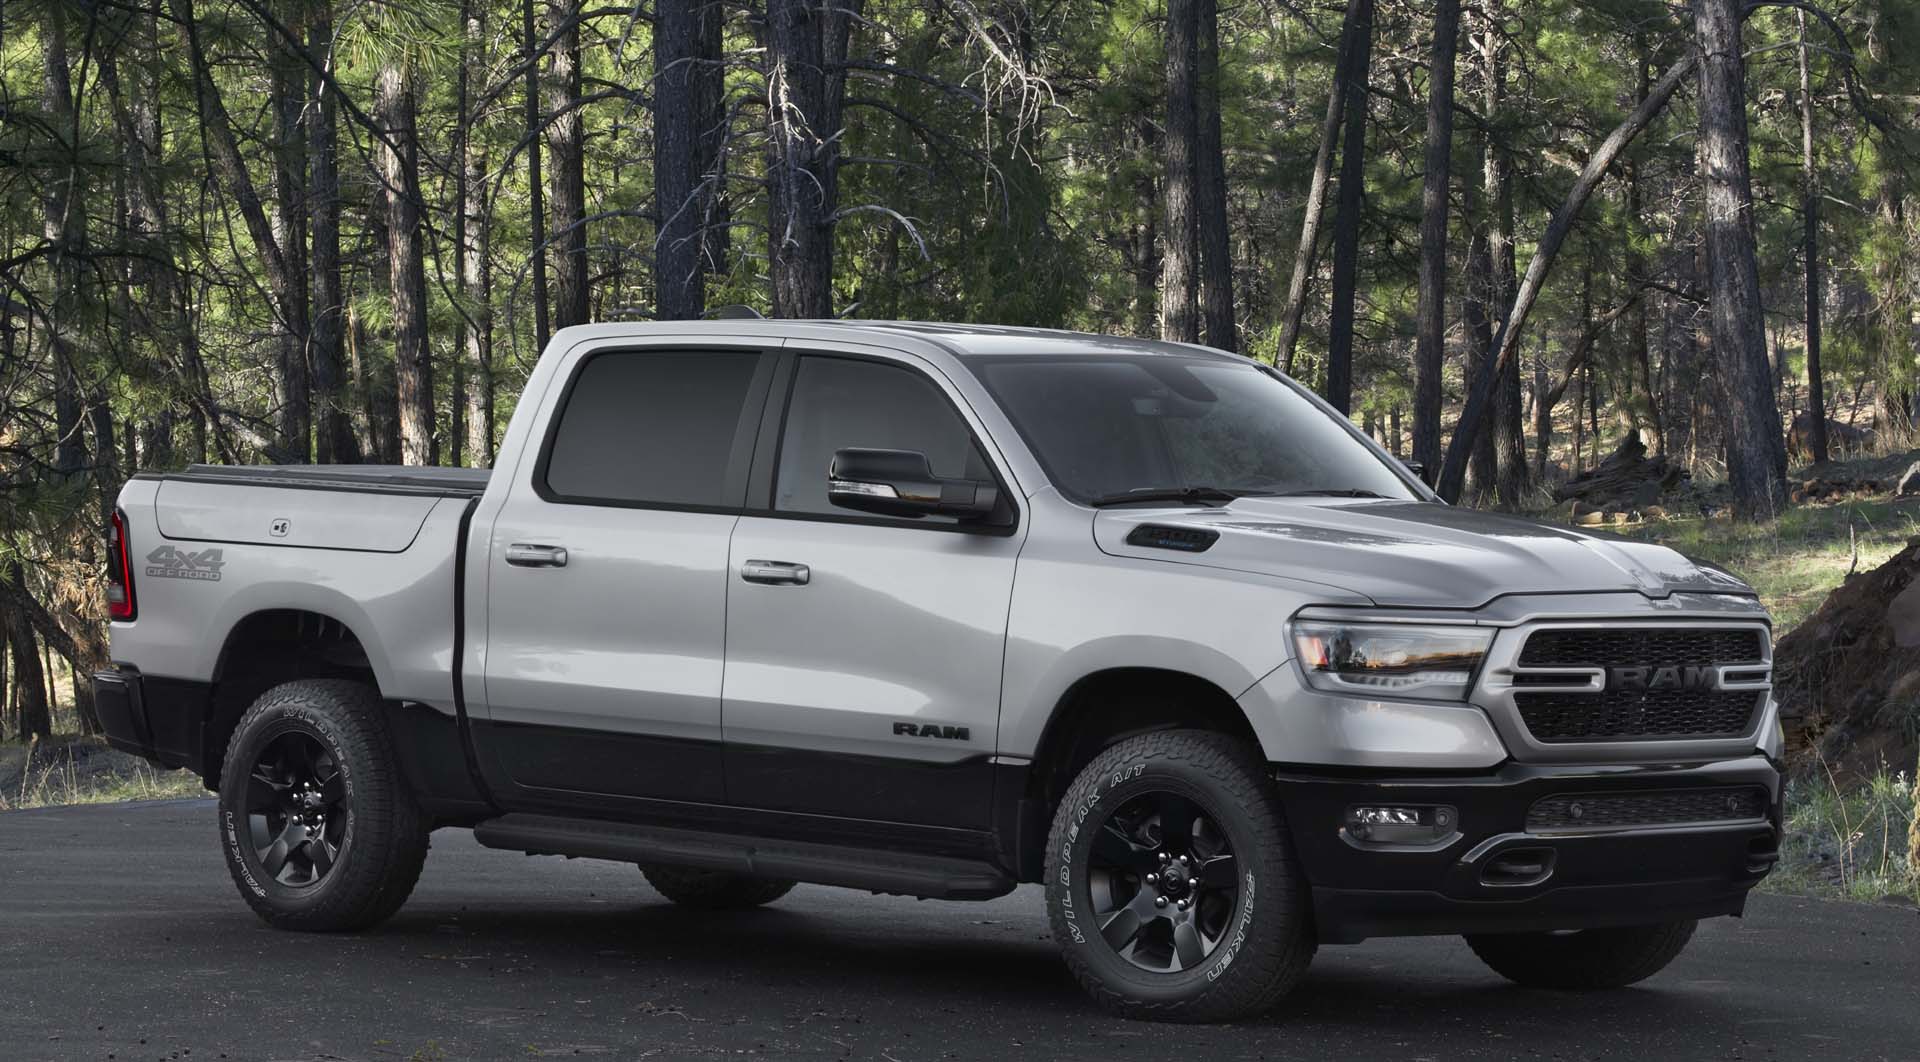 2022 Ram 1500 Big Horn and Lone Star available in new BackCountry Edition